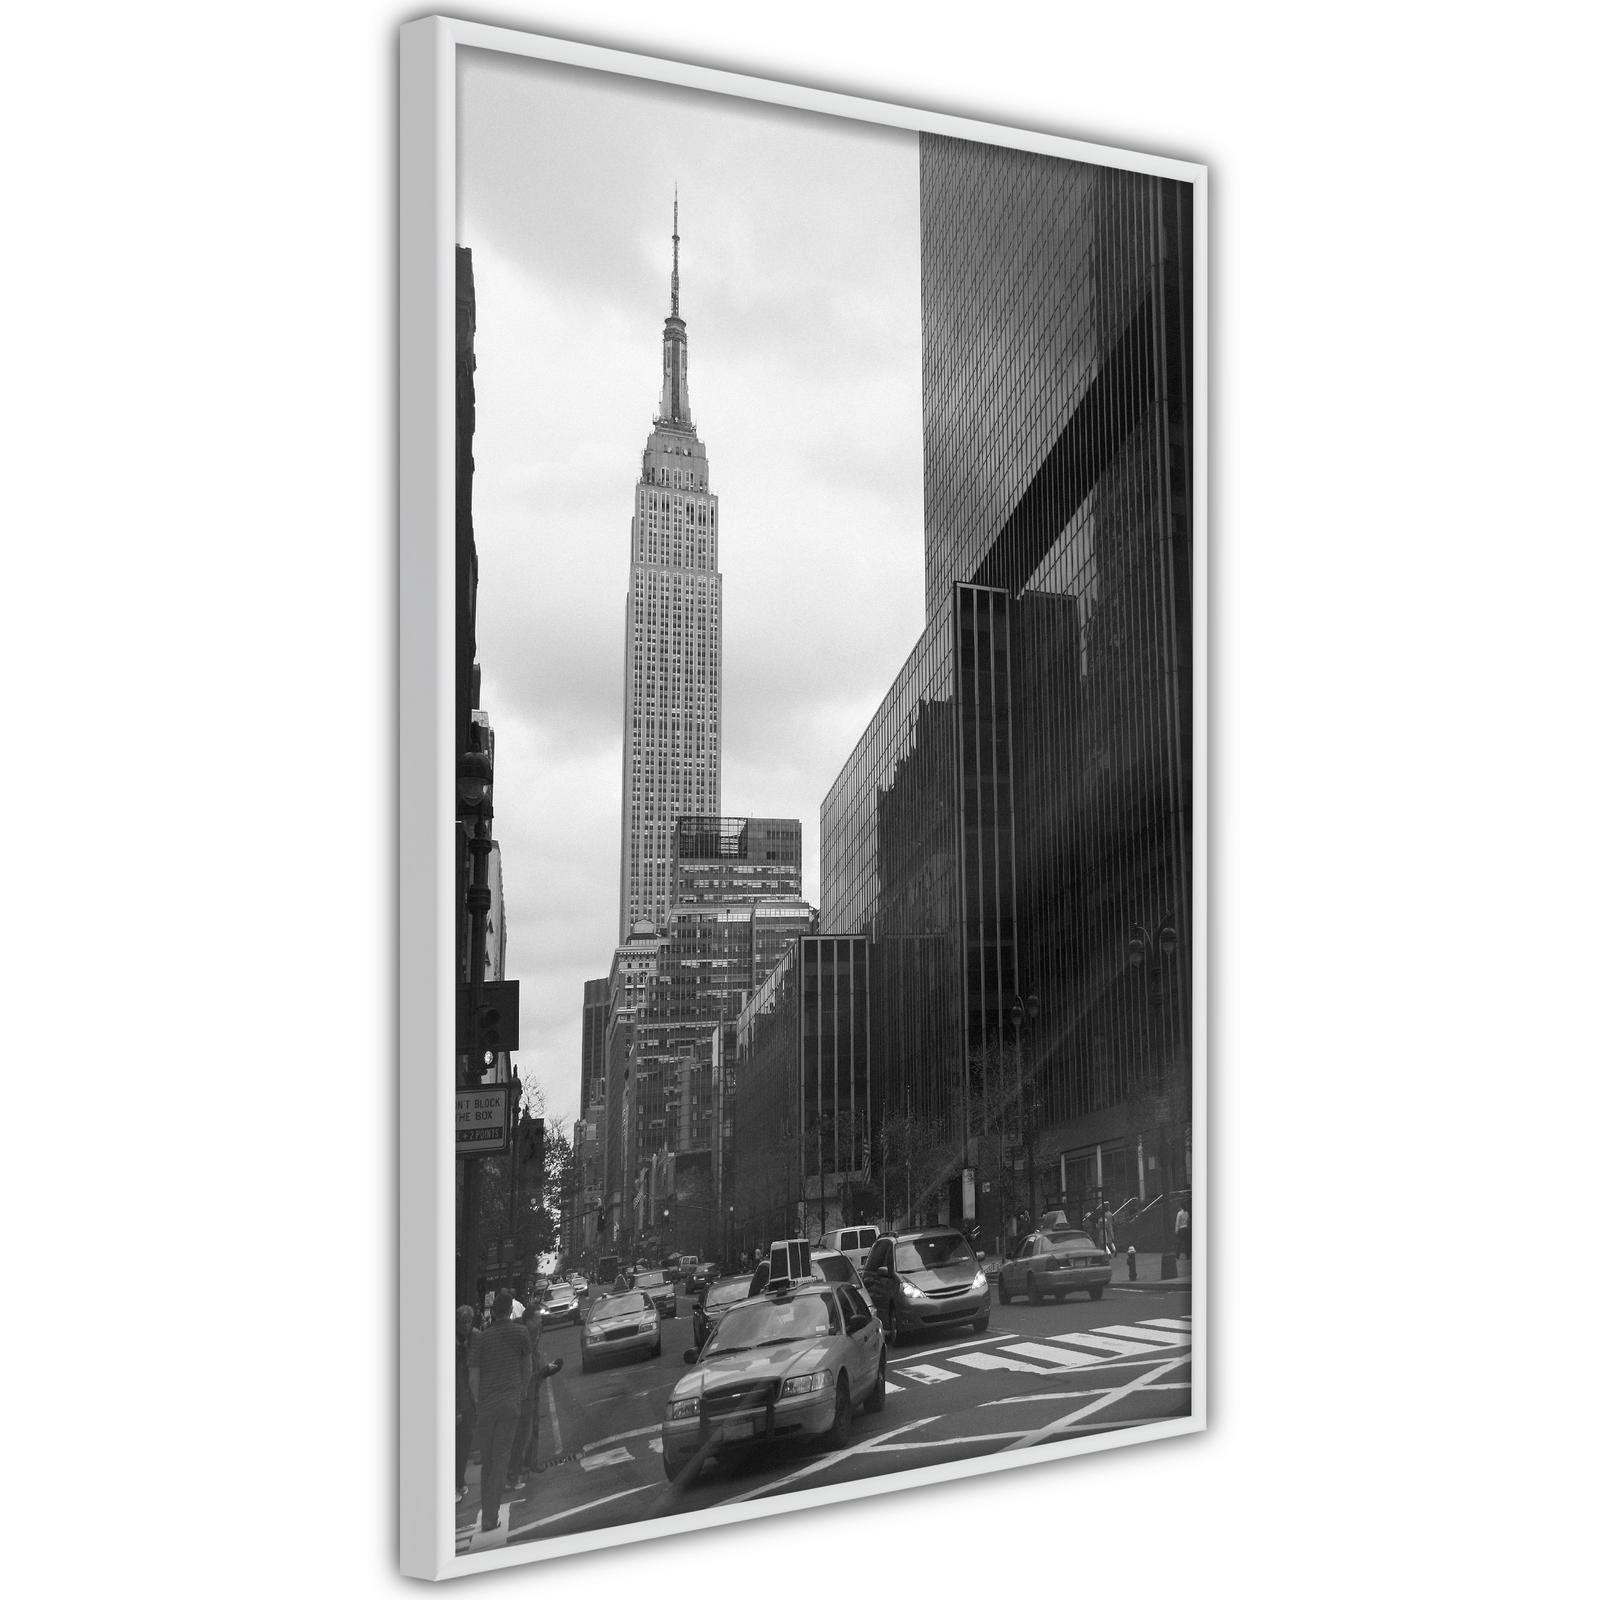 Inramad Poster / Tavla - Empire State Building-Poster Inramad-Artgeist-peaceofhome.se